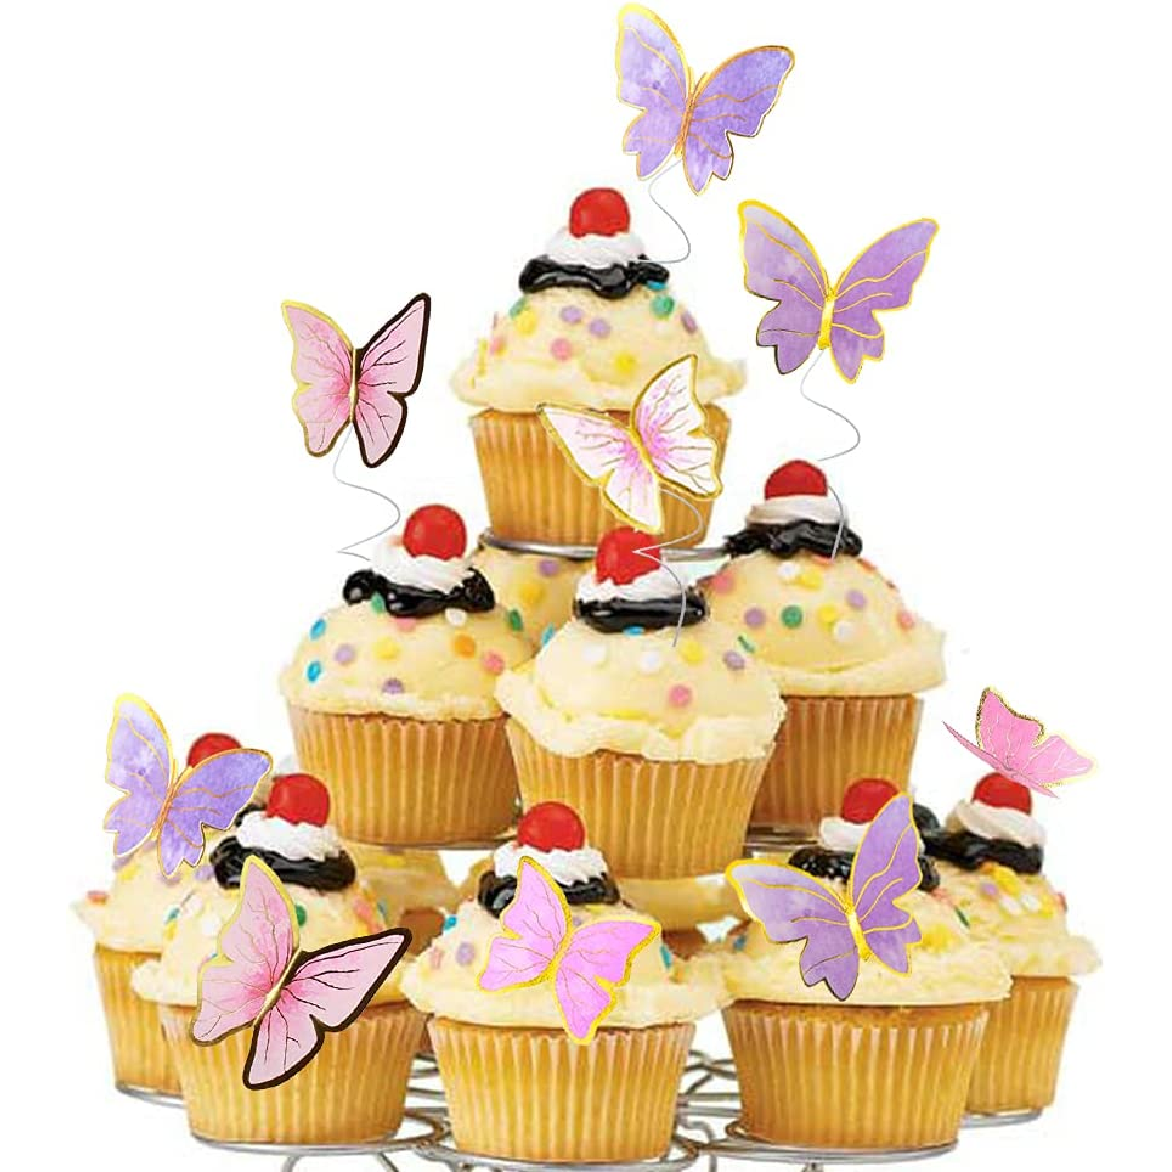 Cake Decoration, Cupcake Topper -3D Butterflies, white with gold trim - pack of 10 - Rampant Coffee Company